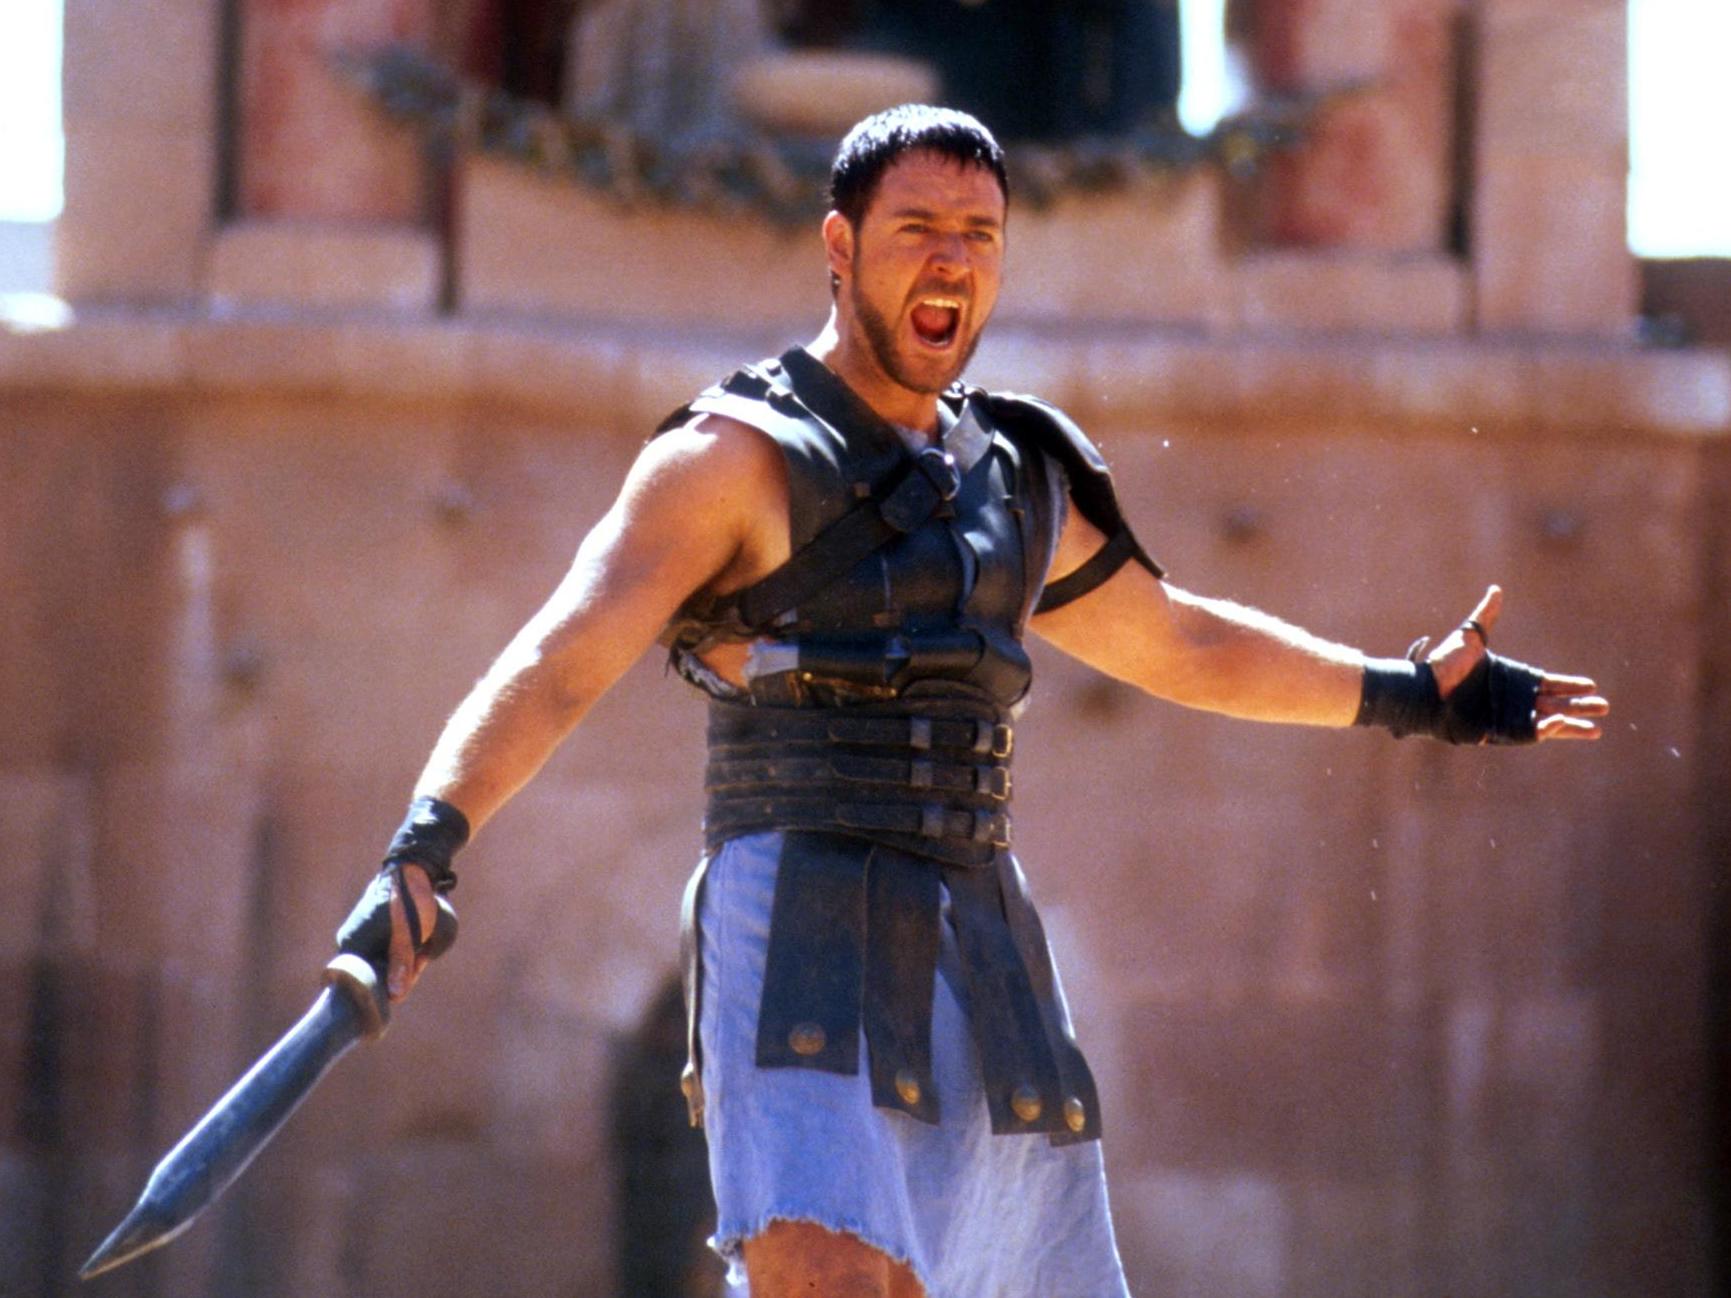 Broken bones, the death of a star, tigers on the loose: The story behind Ridley Scott's Gladiator